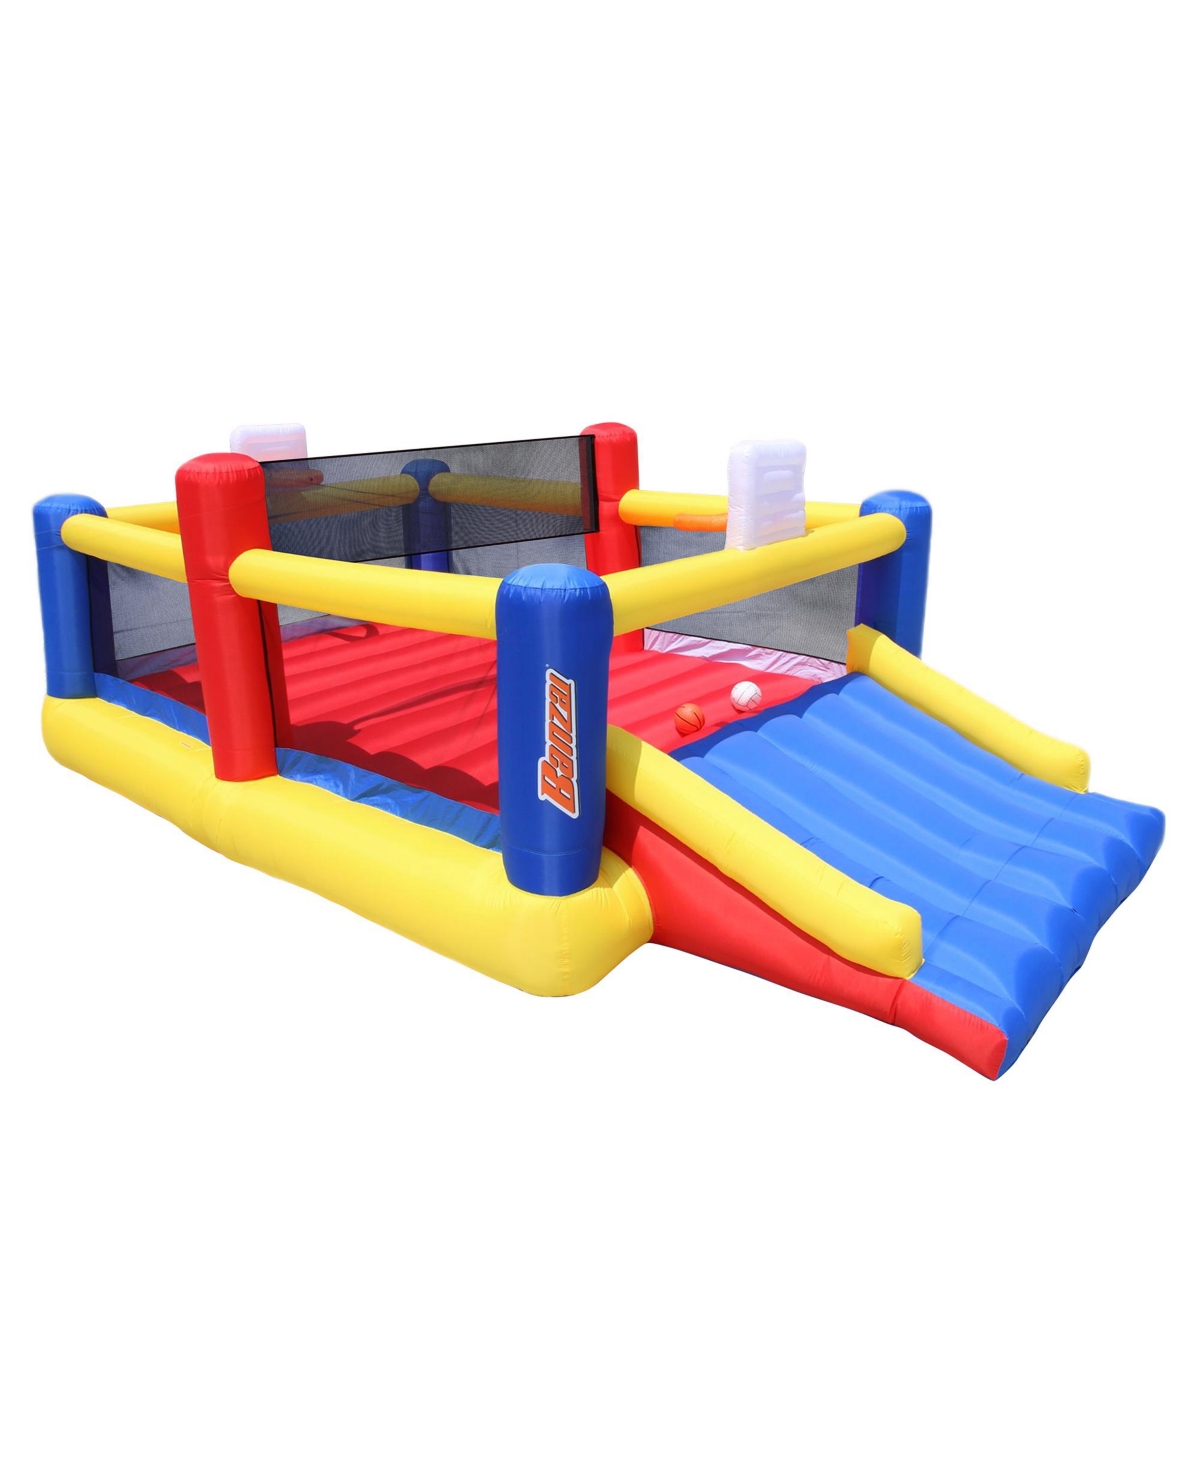 Banzai Sports Zone Bounce Arena Inflatable Bouncer Basketball And Volleyball Motor Air Blower, 17.4' X 10' In Multi